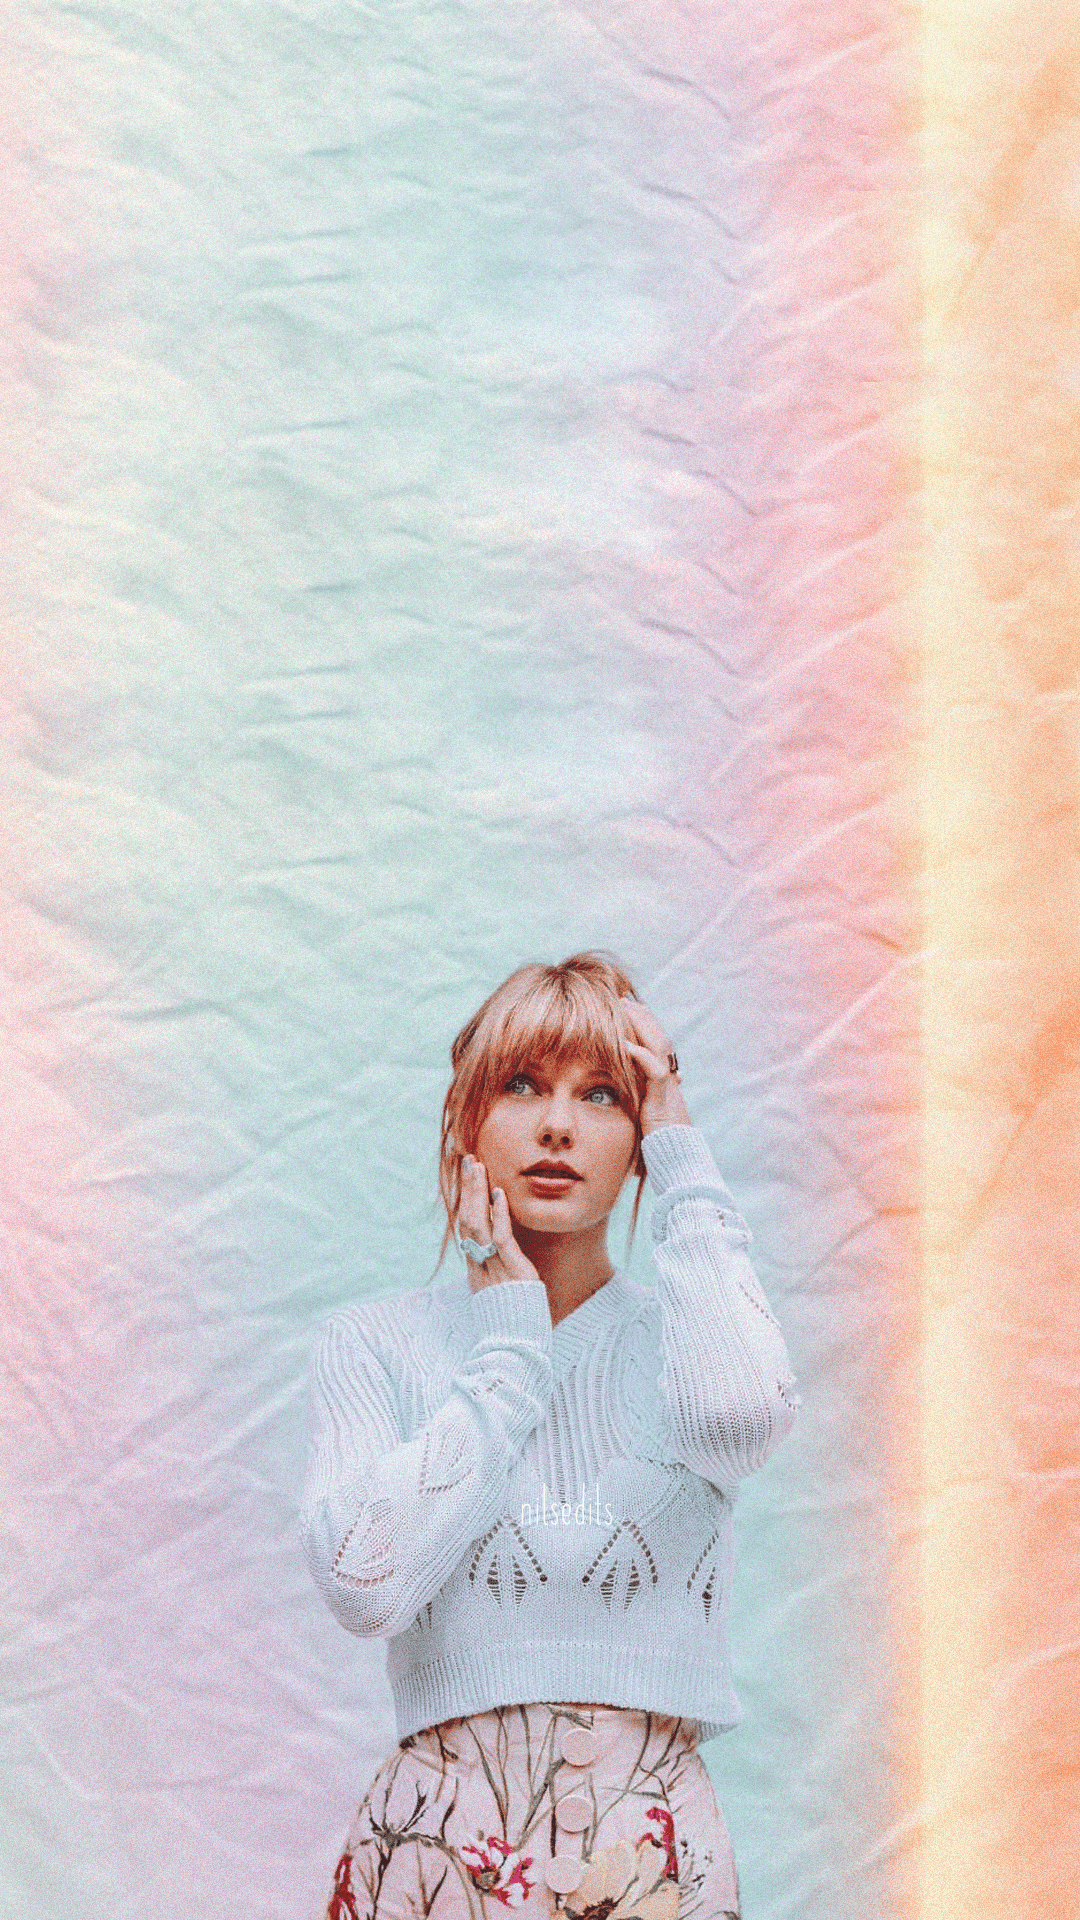 A woman with her hands in her hair standing in front of a rainbow background - Taylor Swift